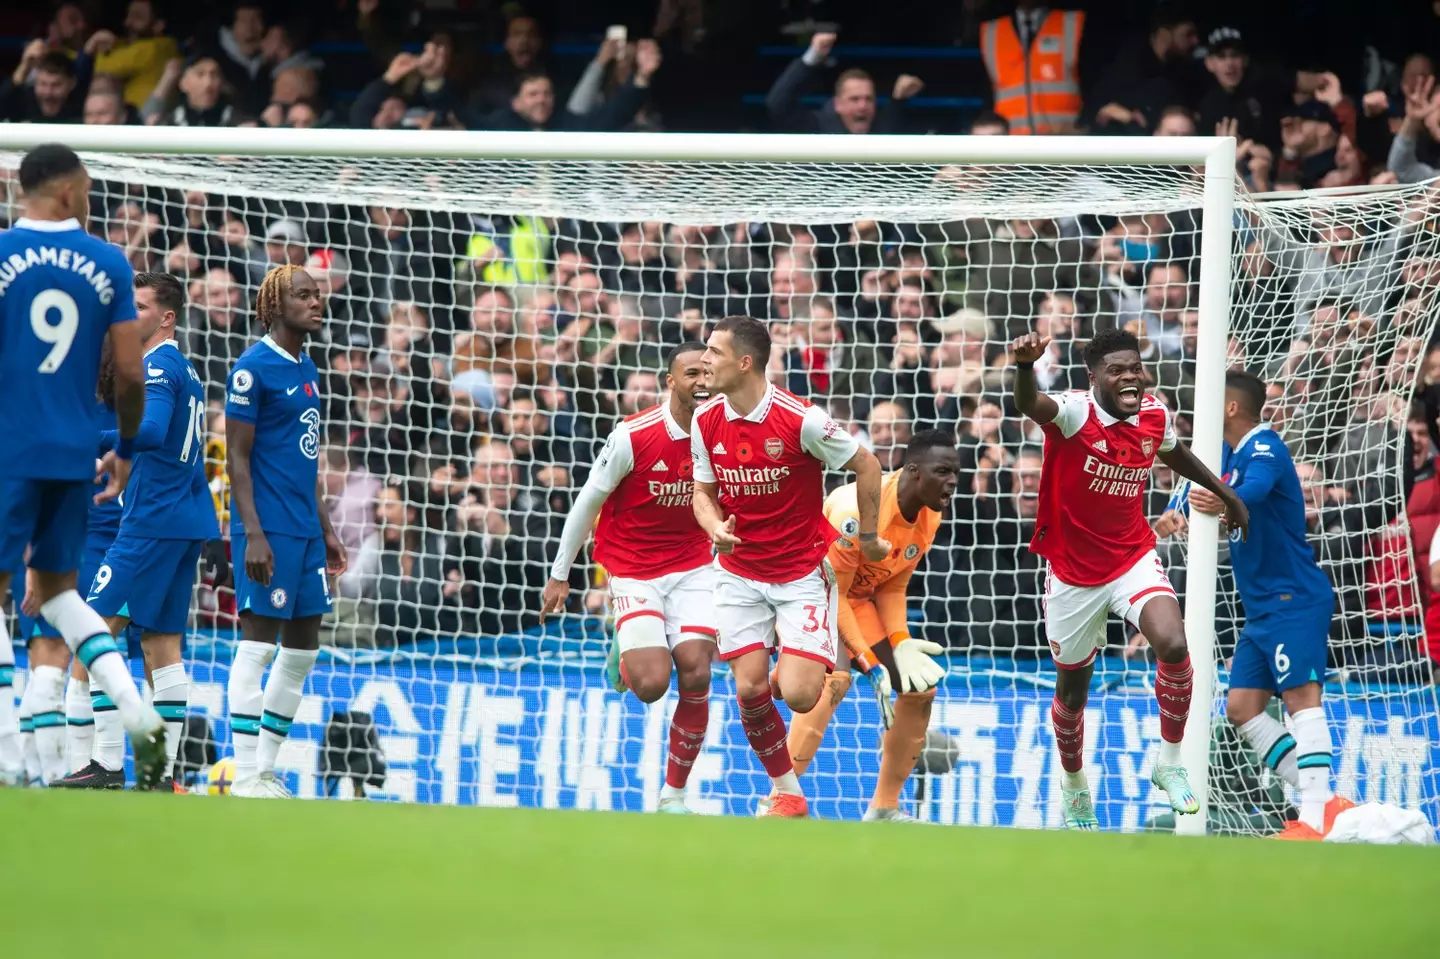 Arsenal players celebrates the goal scored by Gabriel of Arsenal during the Premier League match between Chelsea and Arsenal at Stamford Bridge. (Alamy